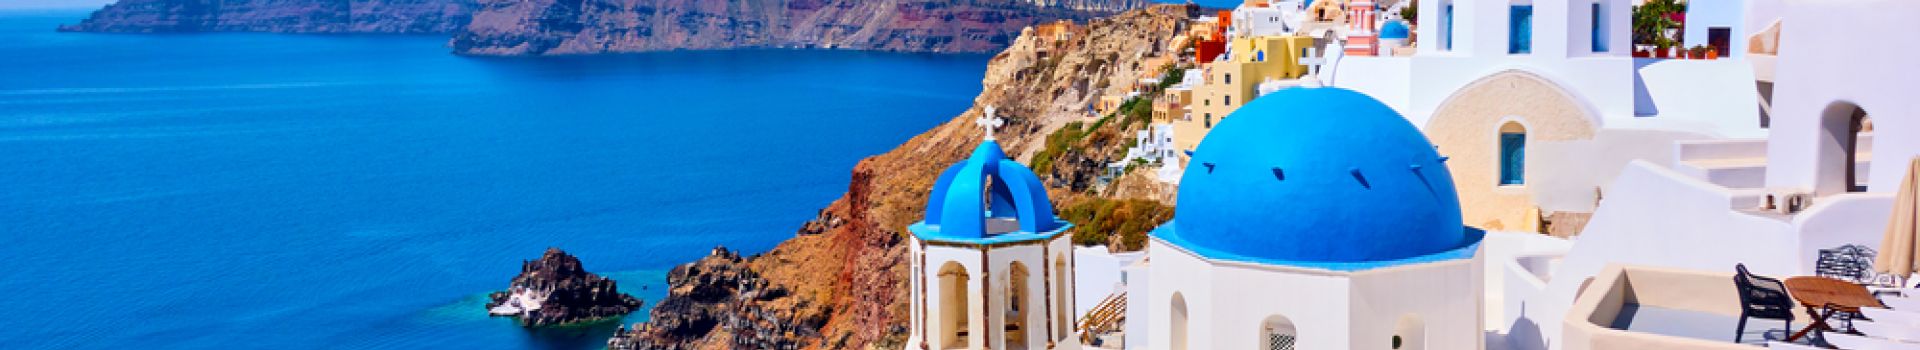 Cheap holidays to Santorini with Cassidy Travel